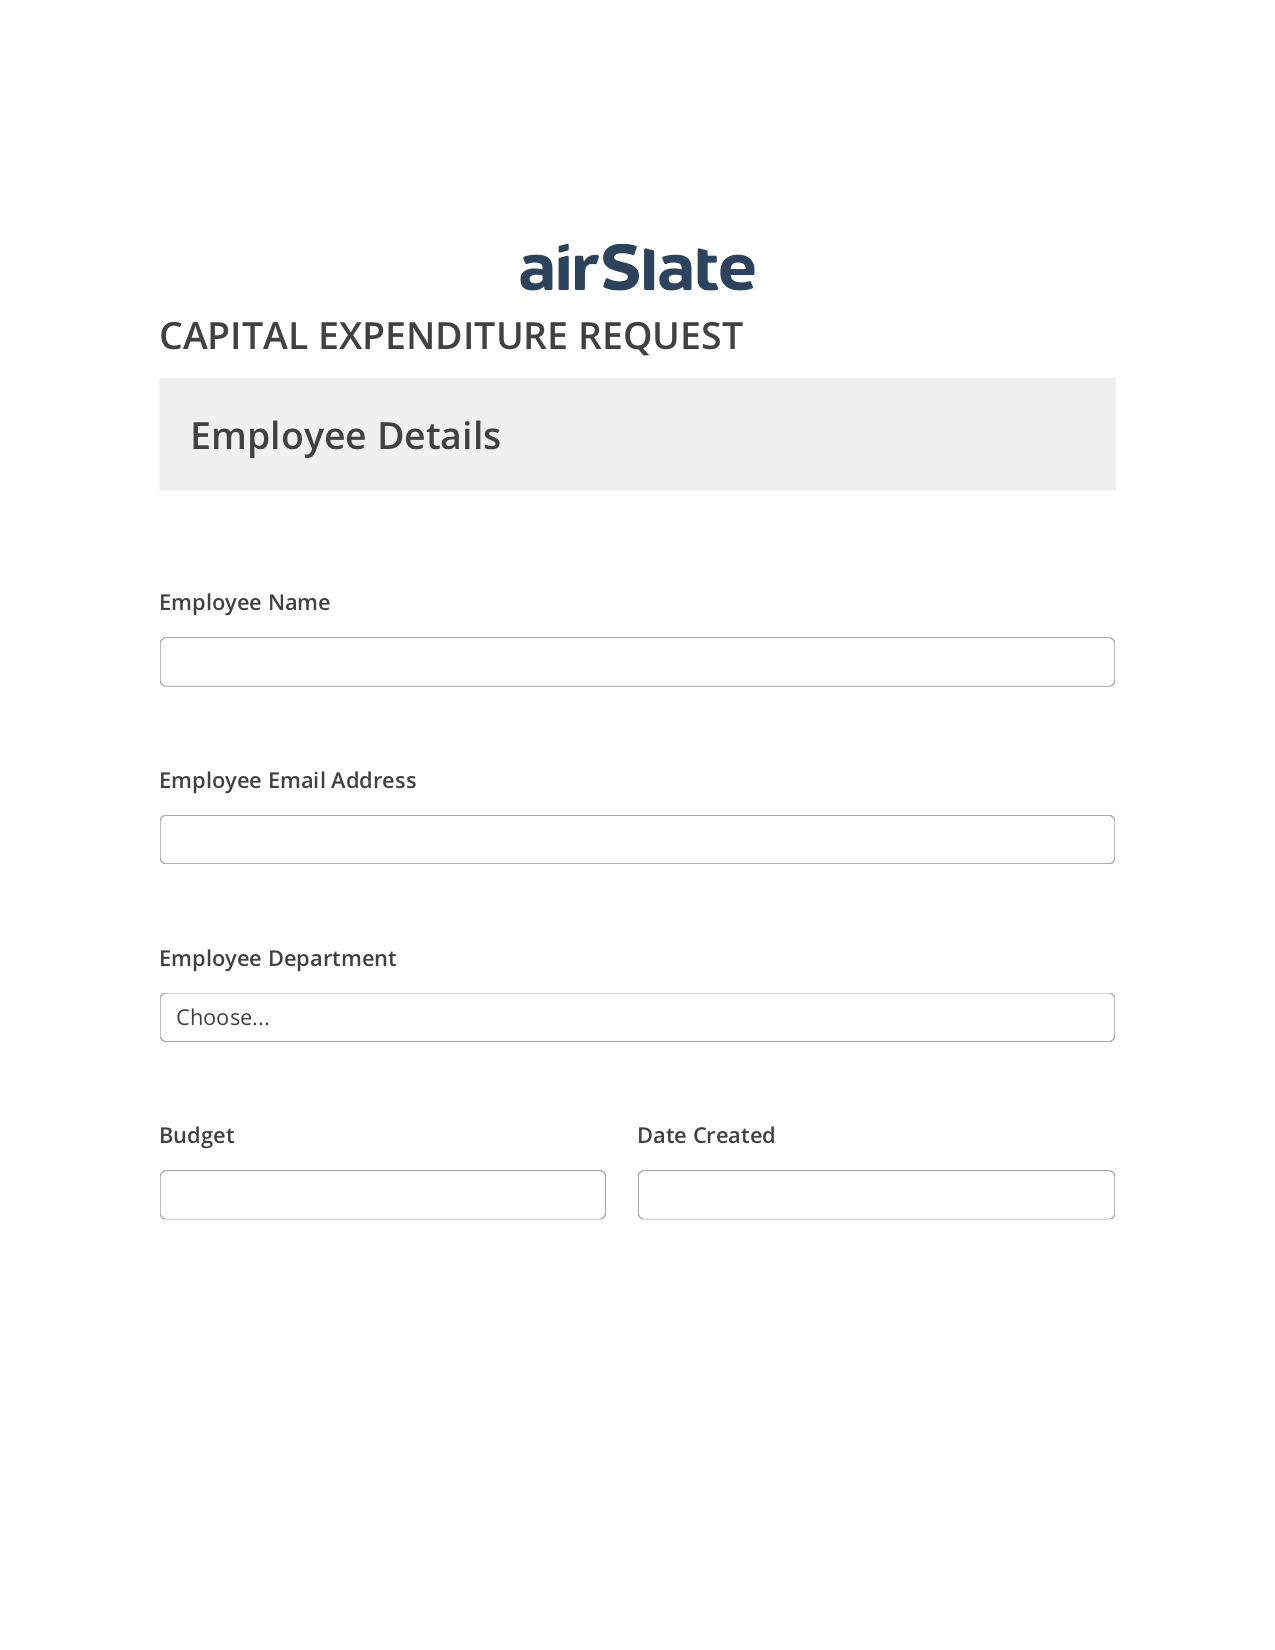 Capital Expenditure Request Approval Workflow Pre-fill Document Bot, Send a Slate to Salesforce Contact Bot, Export to NetSuite Bot